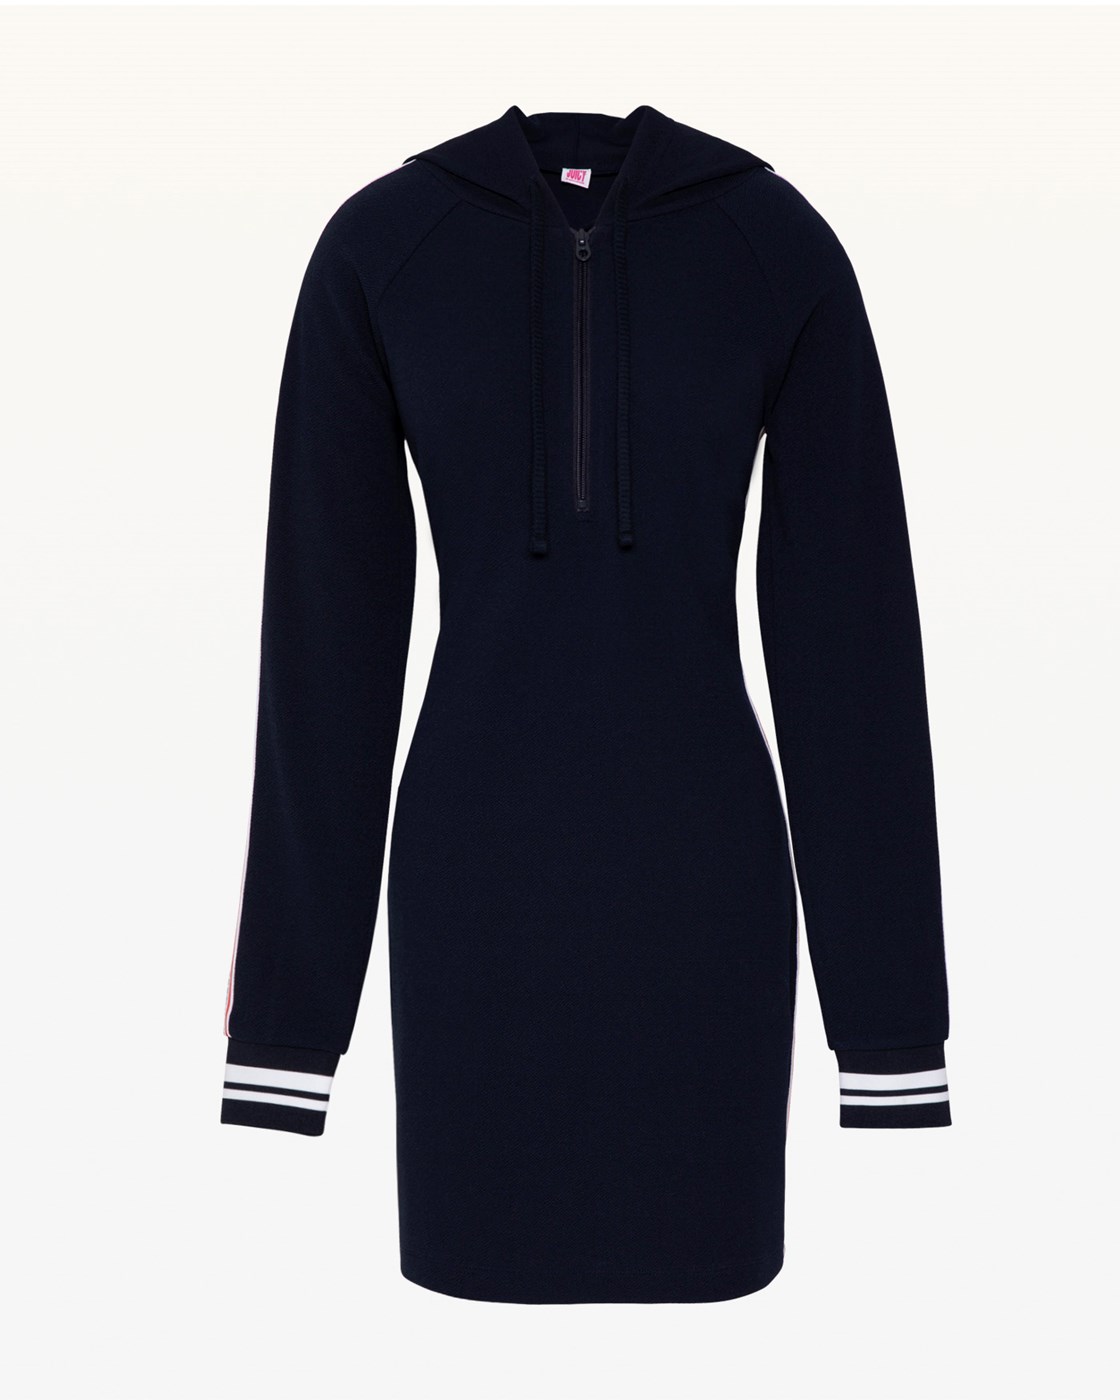 Juicy Couture JXJC Textured Hooded Dress